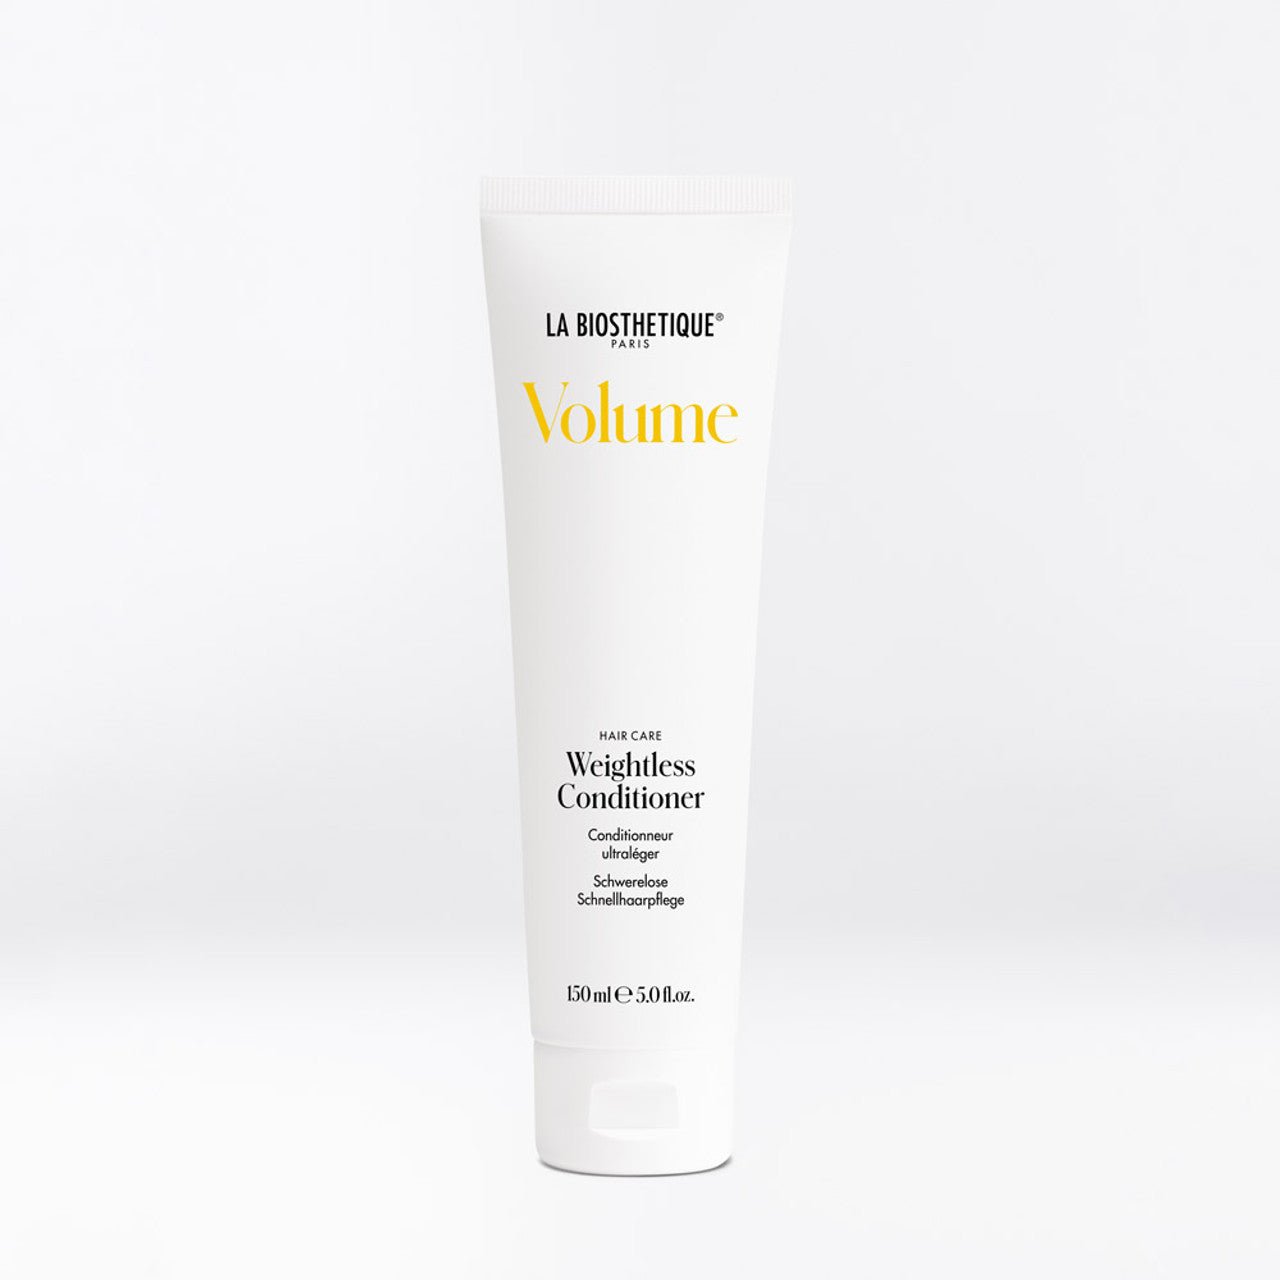 La Biosthetique Volume Weightless Conditioner 150ml - shelley and co